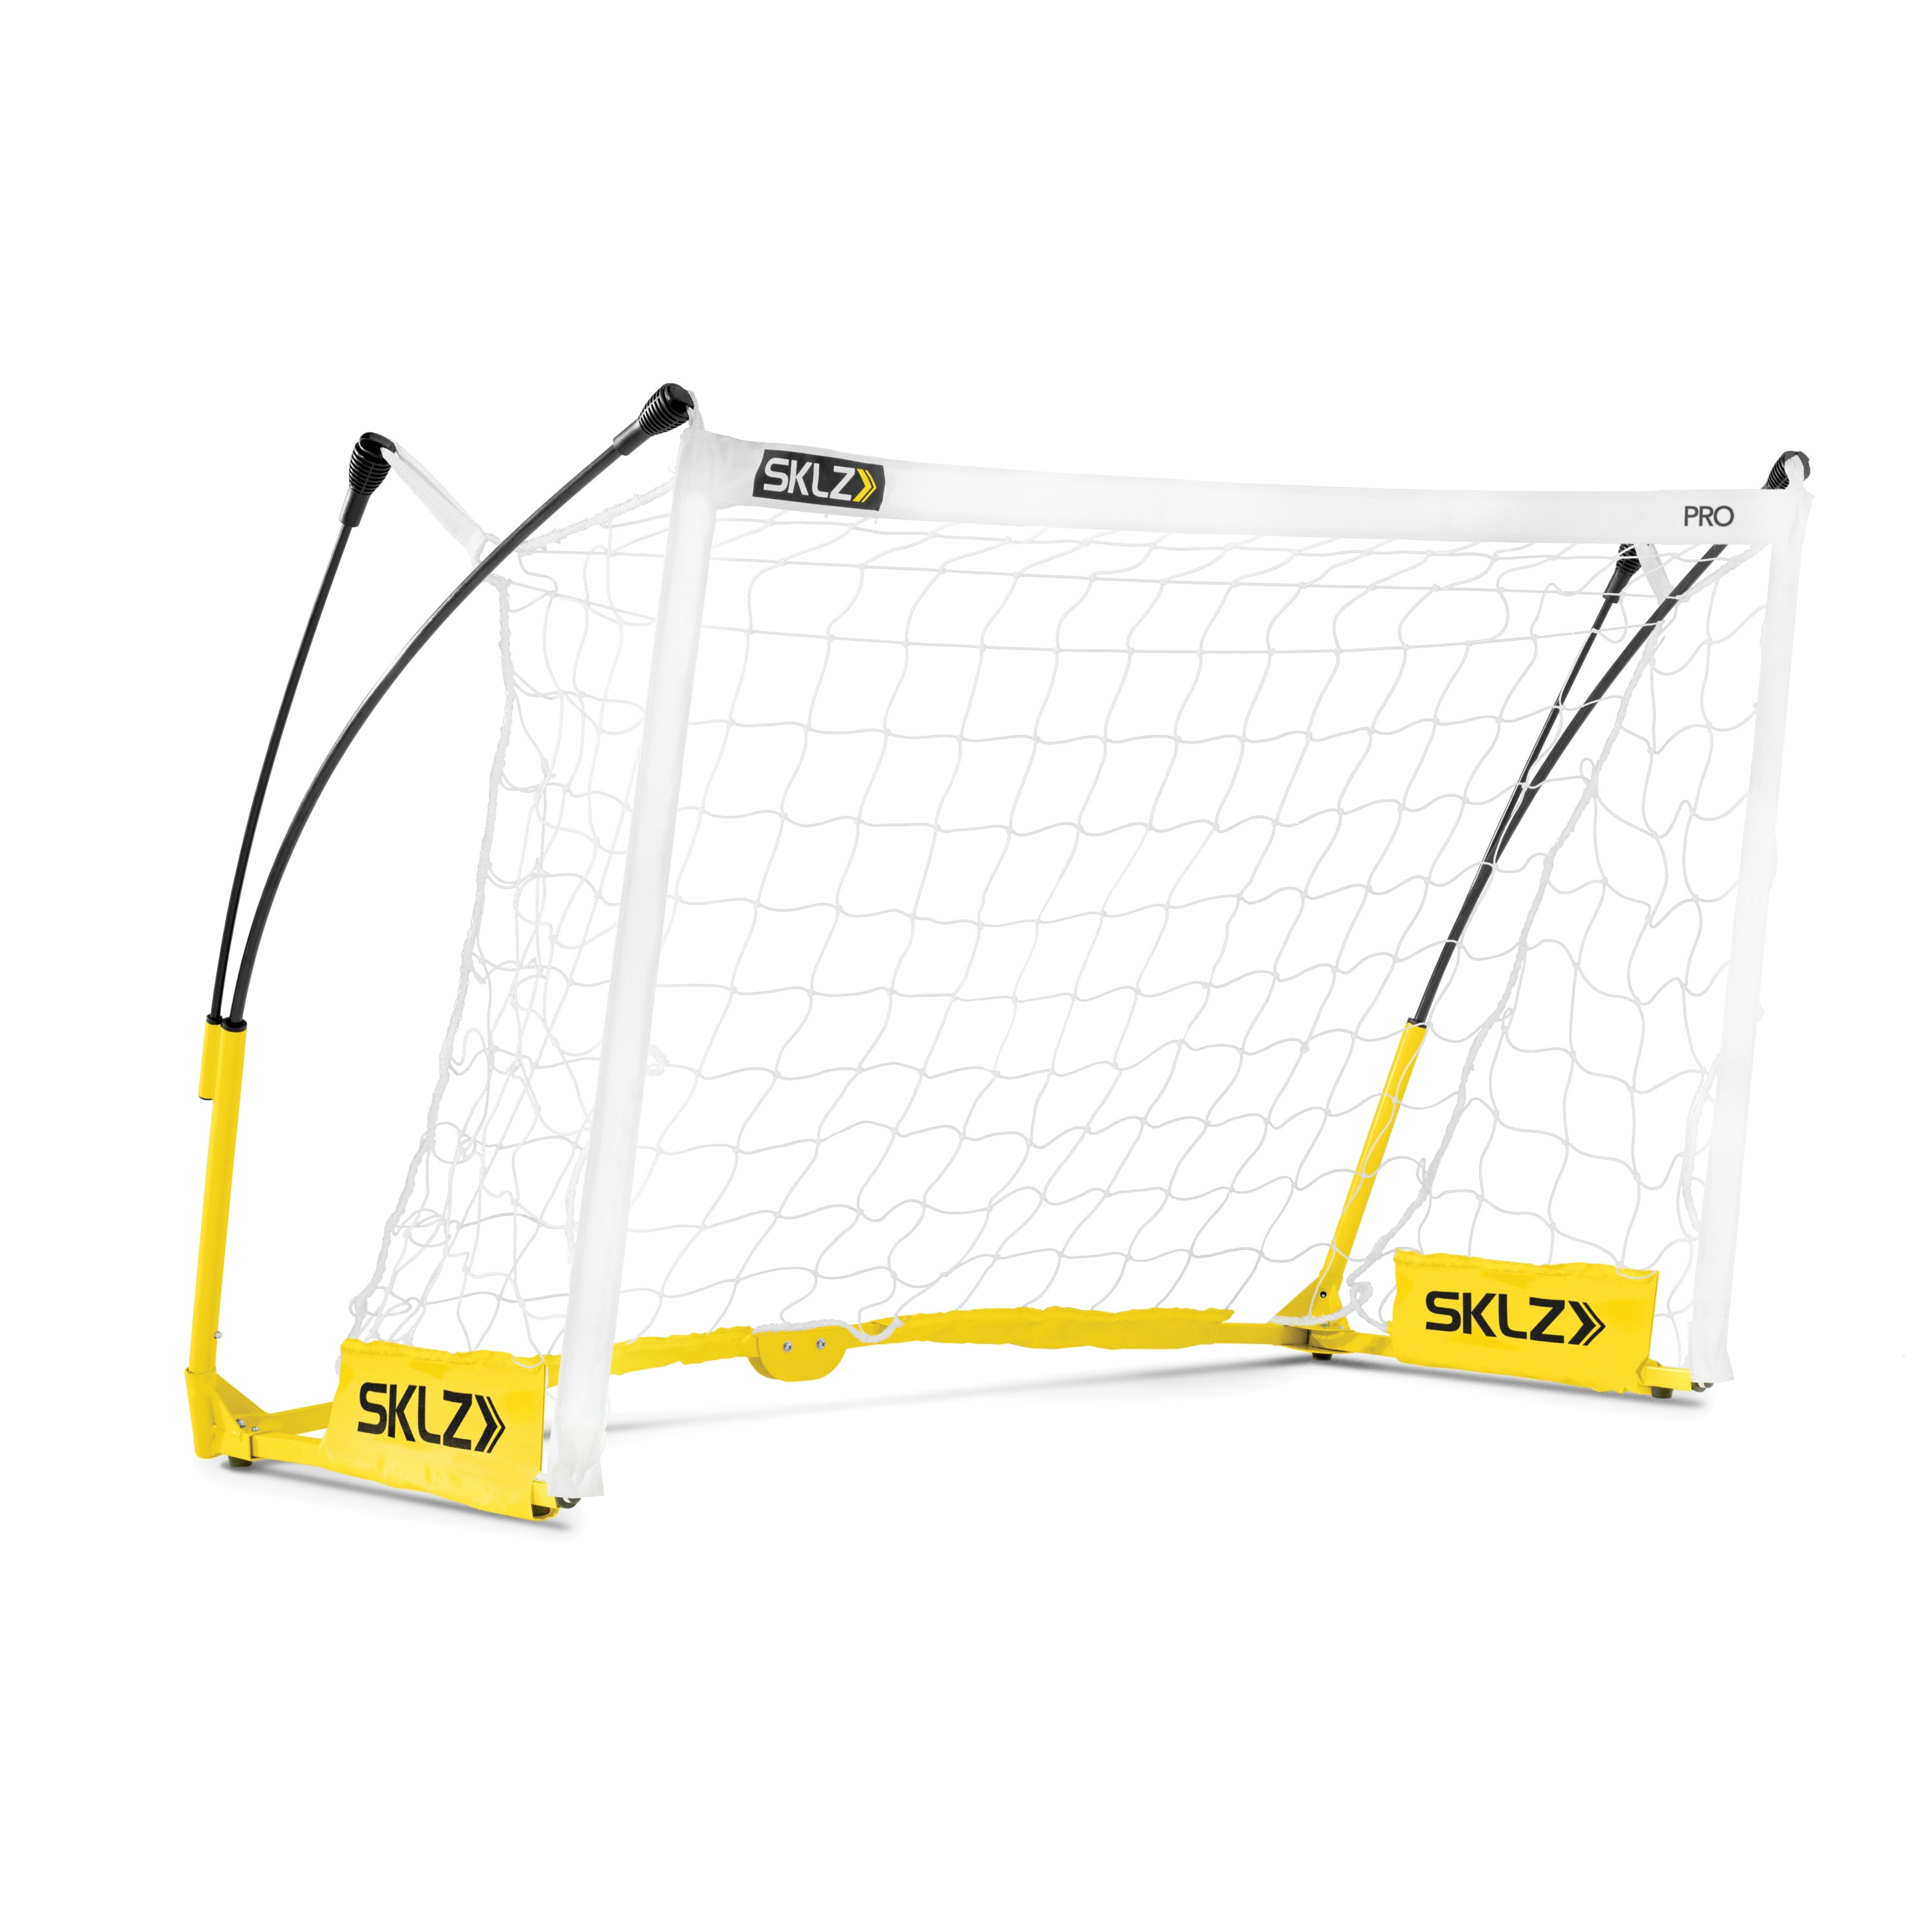 Hockey Goal Targets for Kids Youth Practicing Training and Shooting Metal Framed Sports Soccer Hockey Goal with All Weather Net 4 x 4 FT Hockey Training Goal Net for Backyard